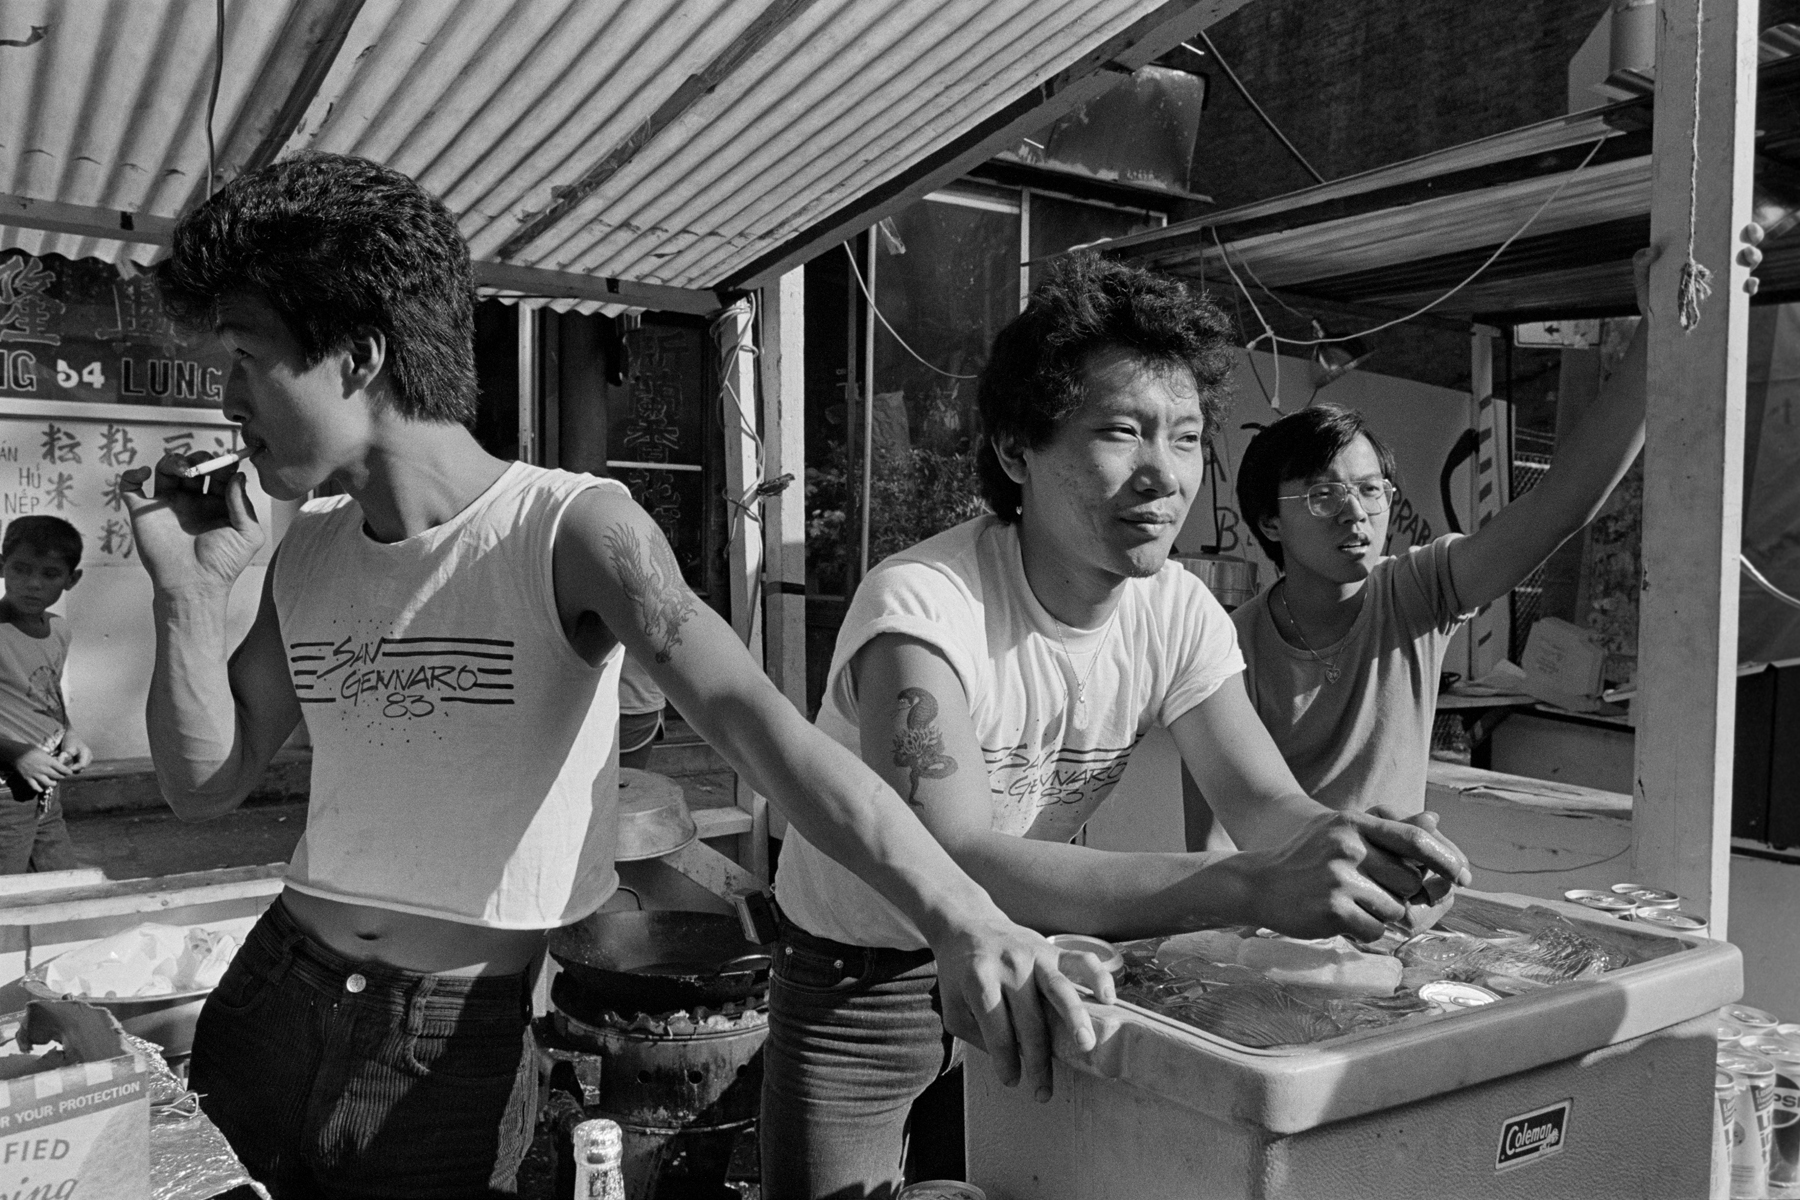 San Gennaro Festival, Mulberry St., New York City, 1983.These young men had a booth at the San Gennaro Festival. Within a day of this photo going up on the Hyperallergic website in early 2017, I was contacted by the young man on the right, now in his early 50s.